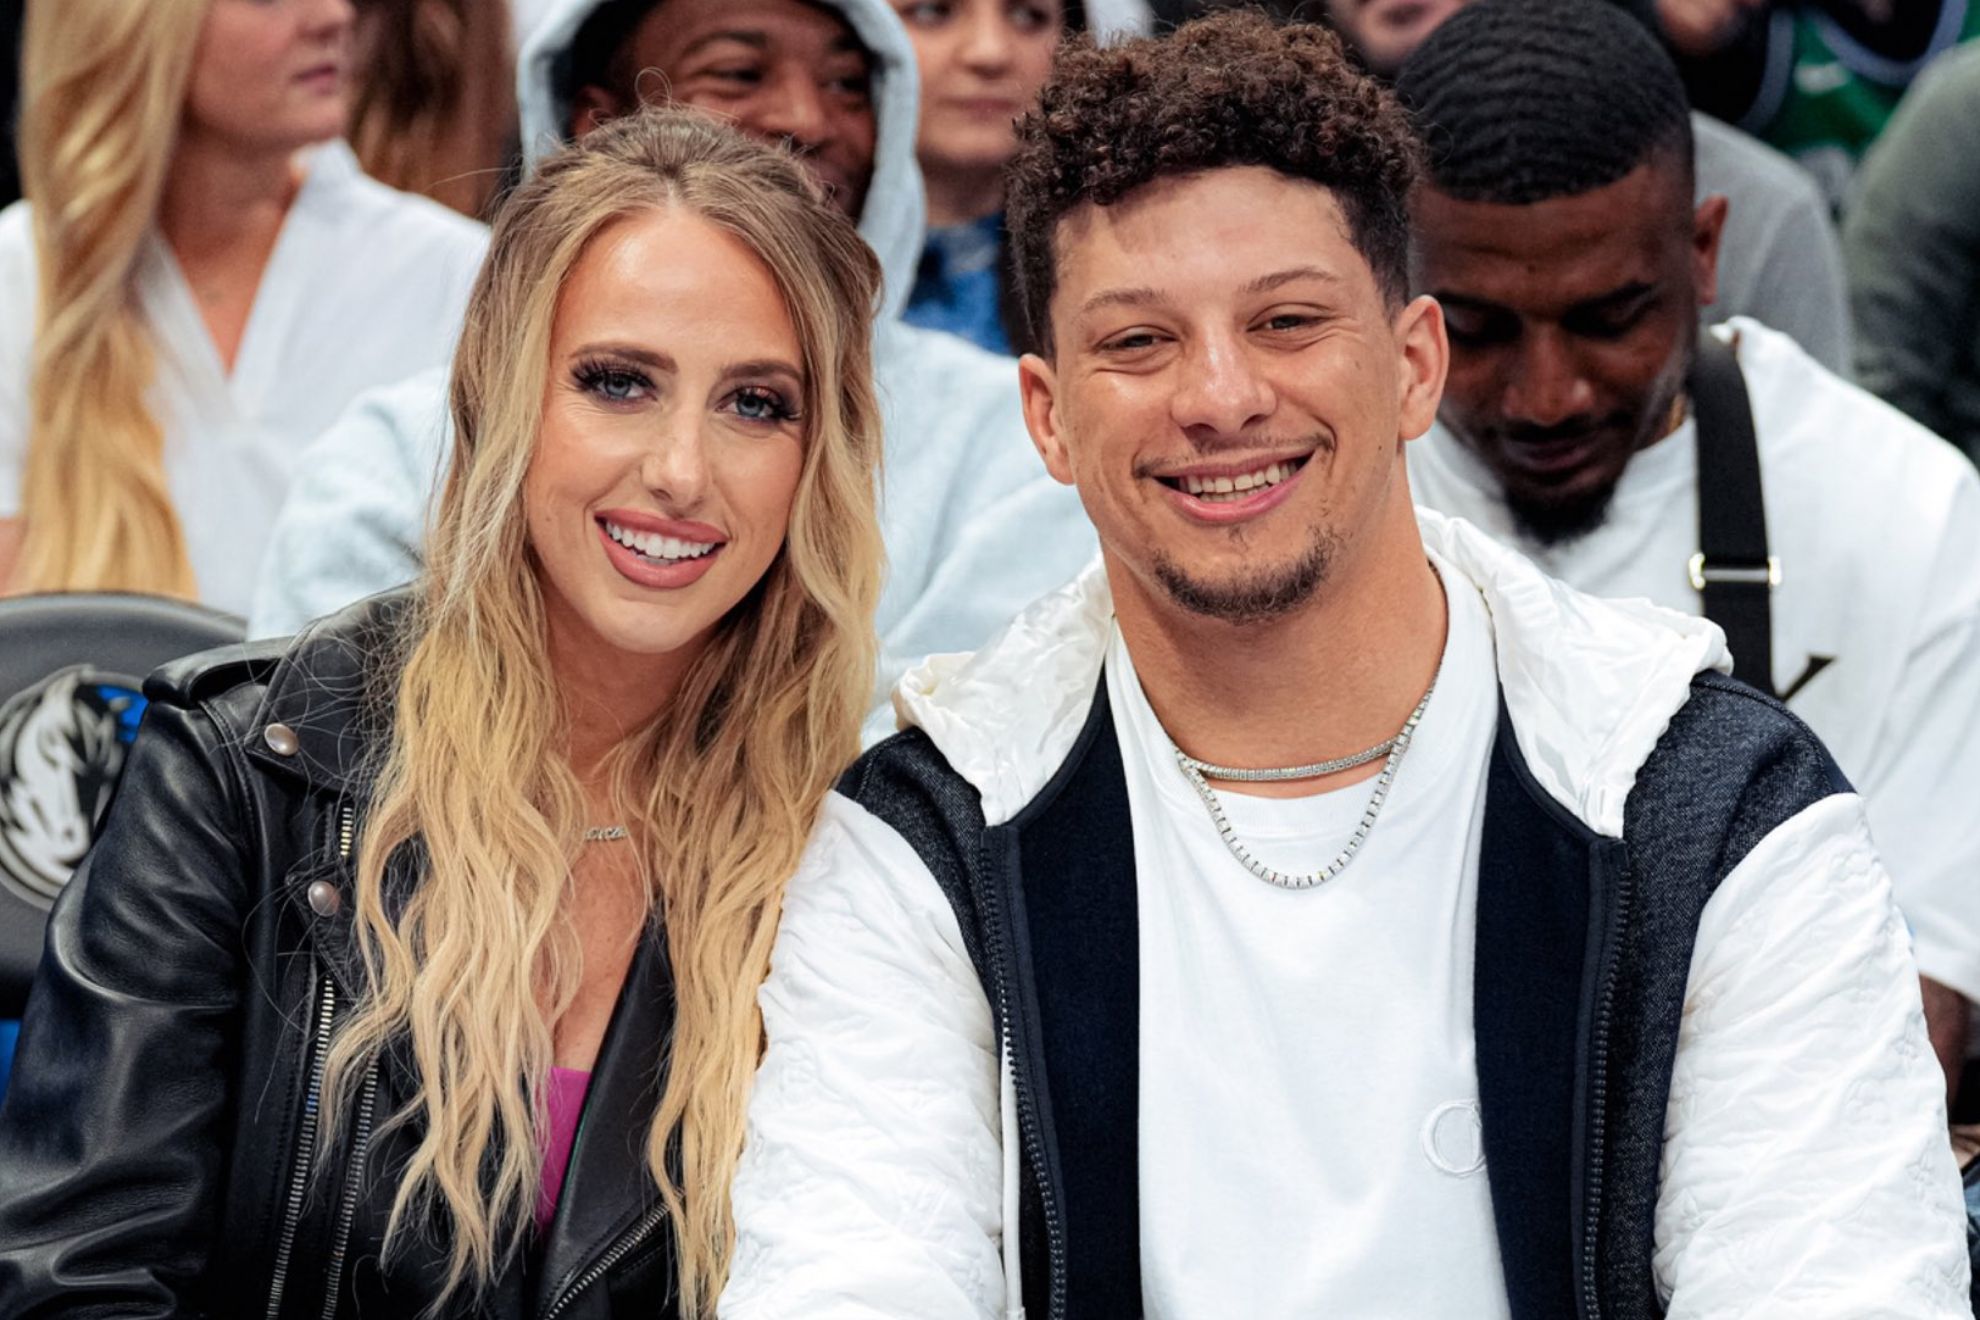 Patrick Mahomes and wife Brittany sit courtside at Lakers-Mavericks game